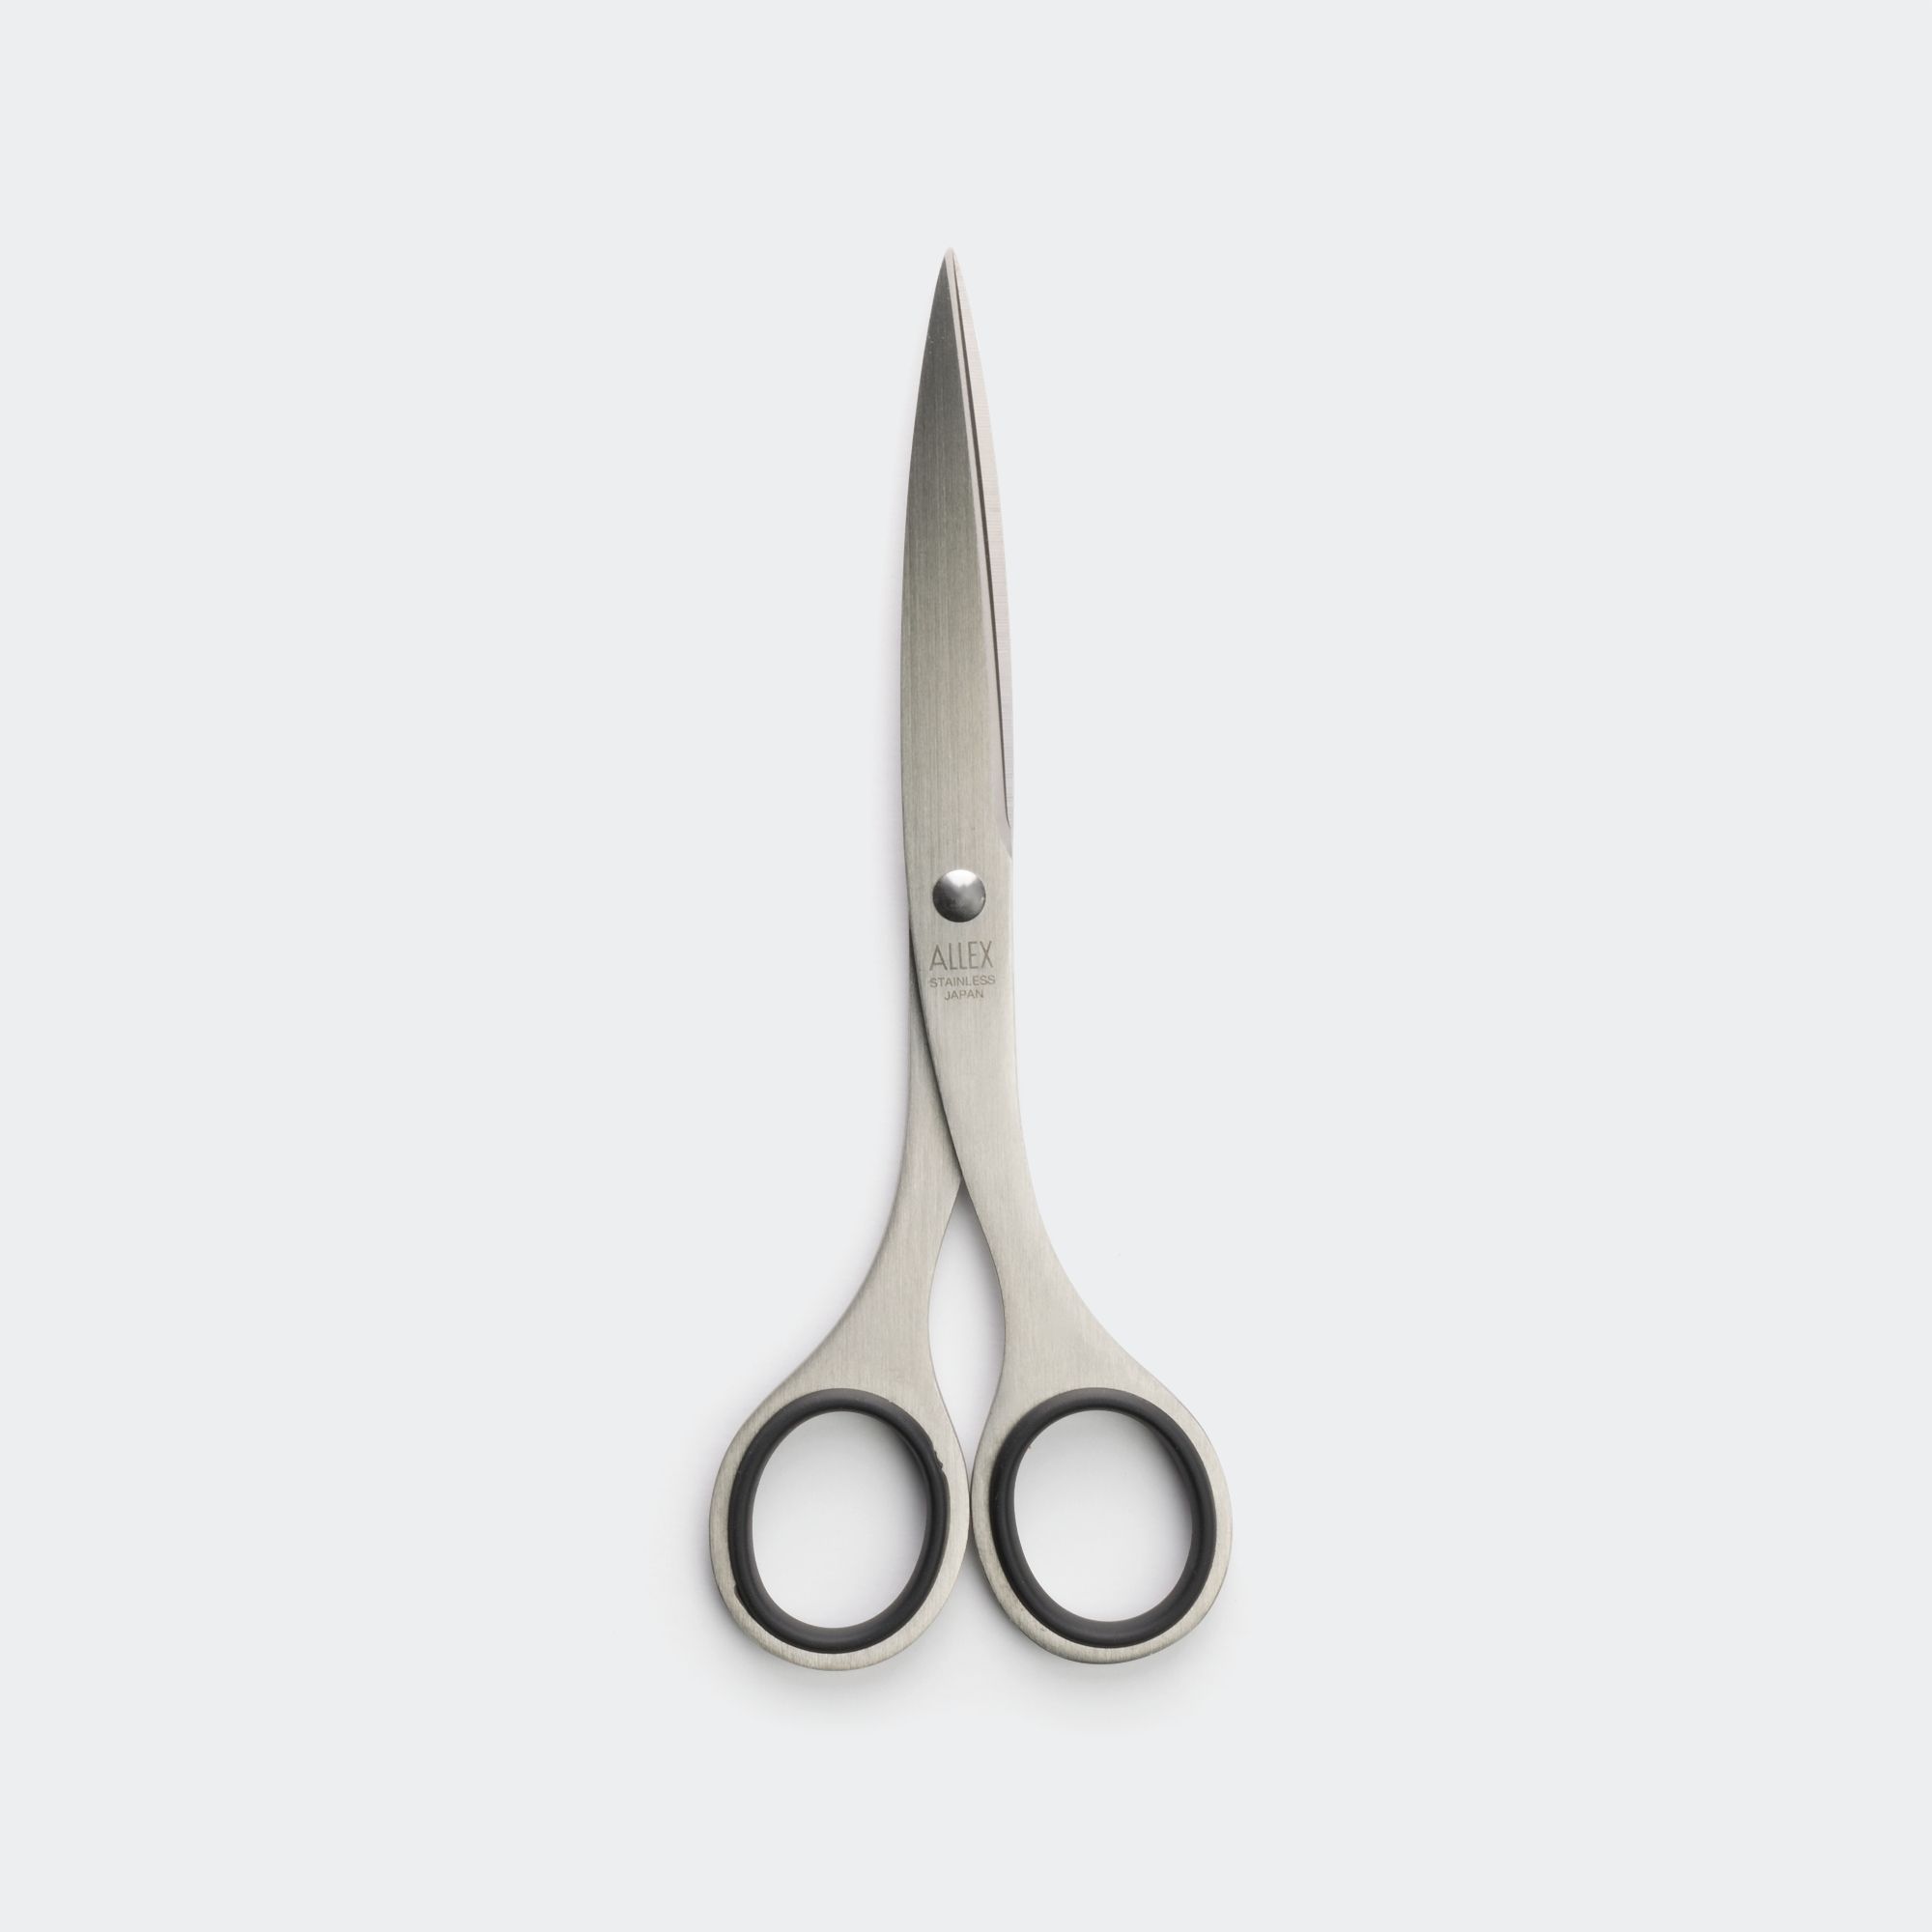  ALLEX Japanese Office Scissors for Desk, Extra Large 7.8 All  Purpose Scissors, Made in JAPAN, All Metal Sharp Japanese Stainless Steel  Blade with Non-Slip Soft Ring, Yellow : Office Products